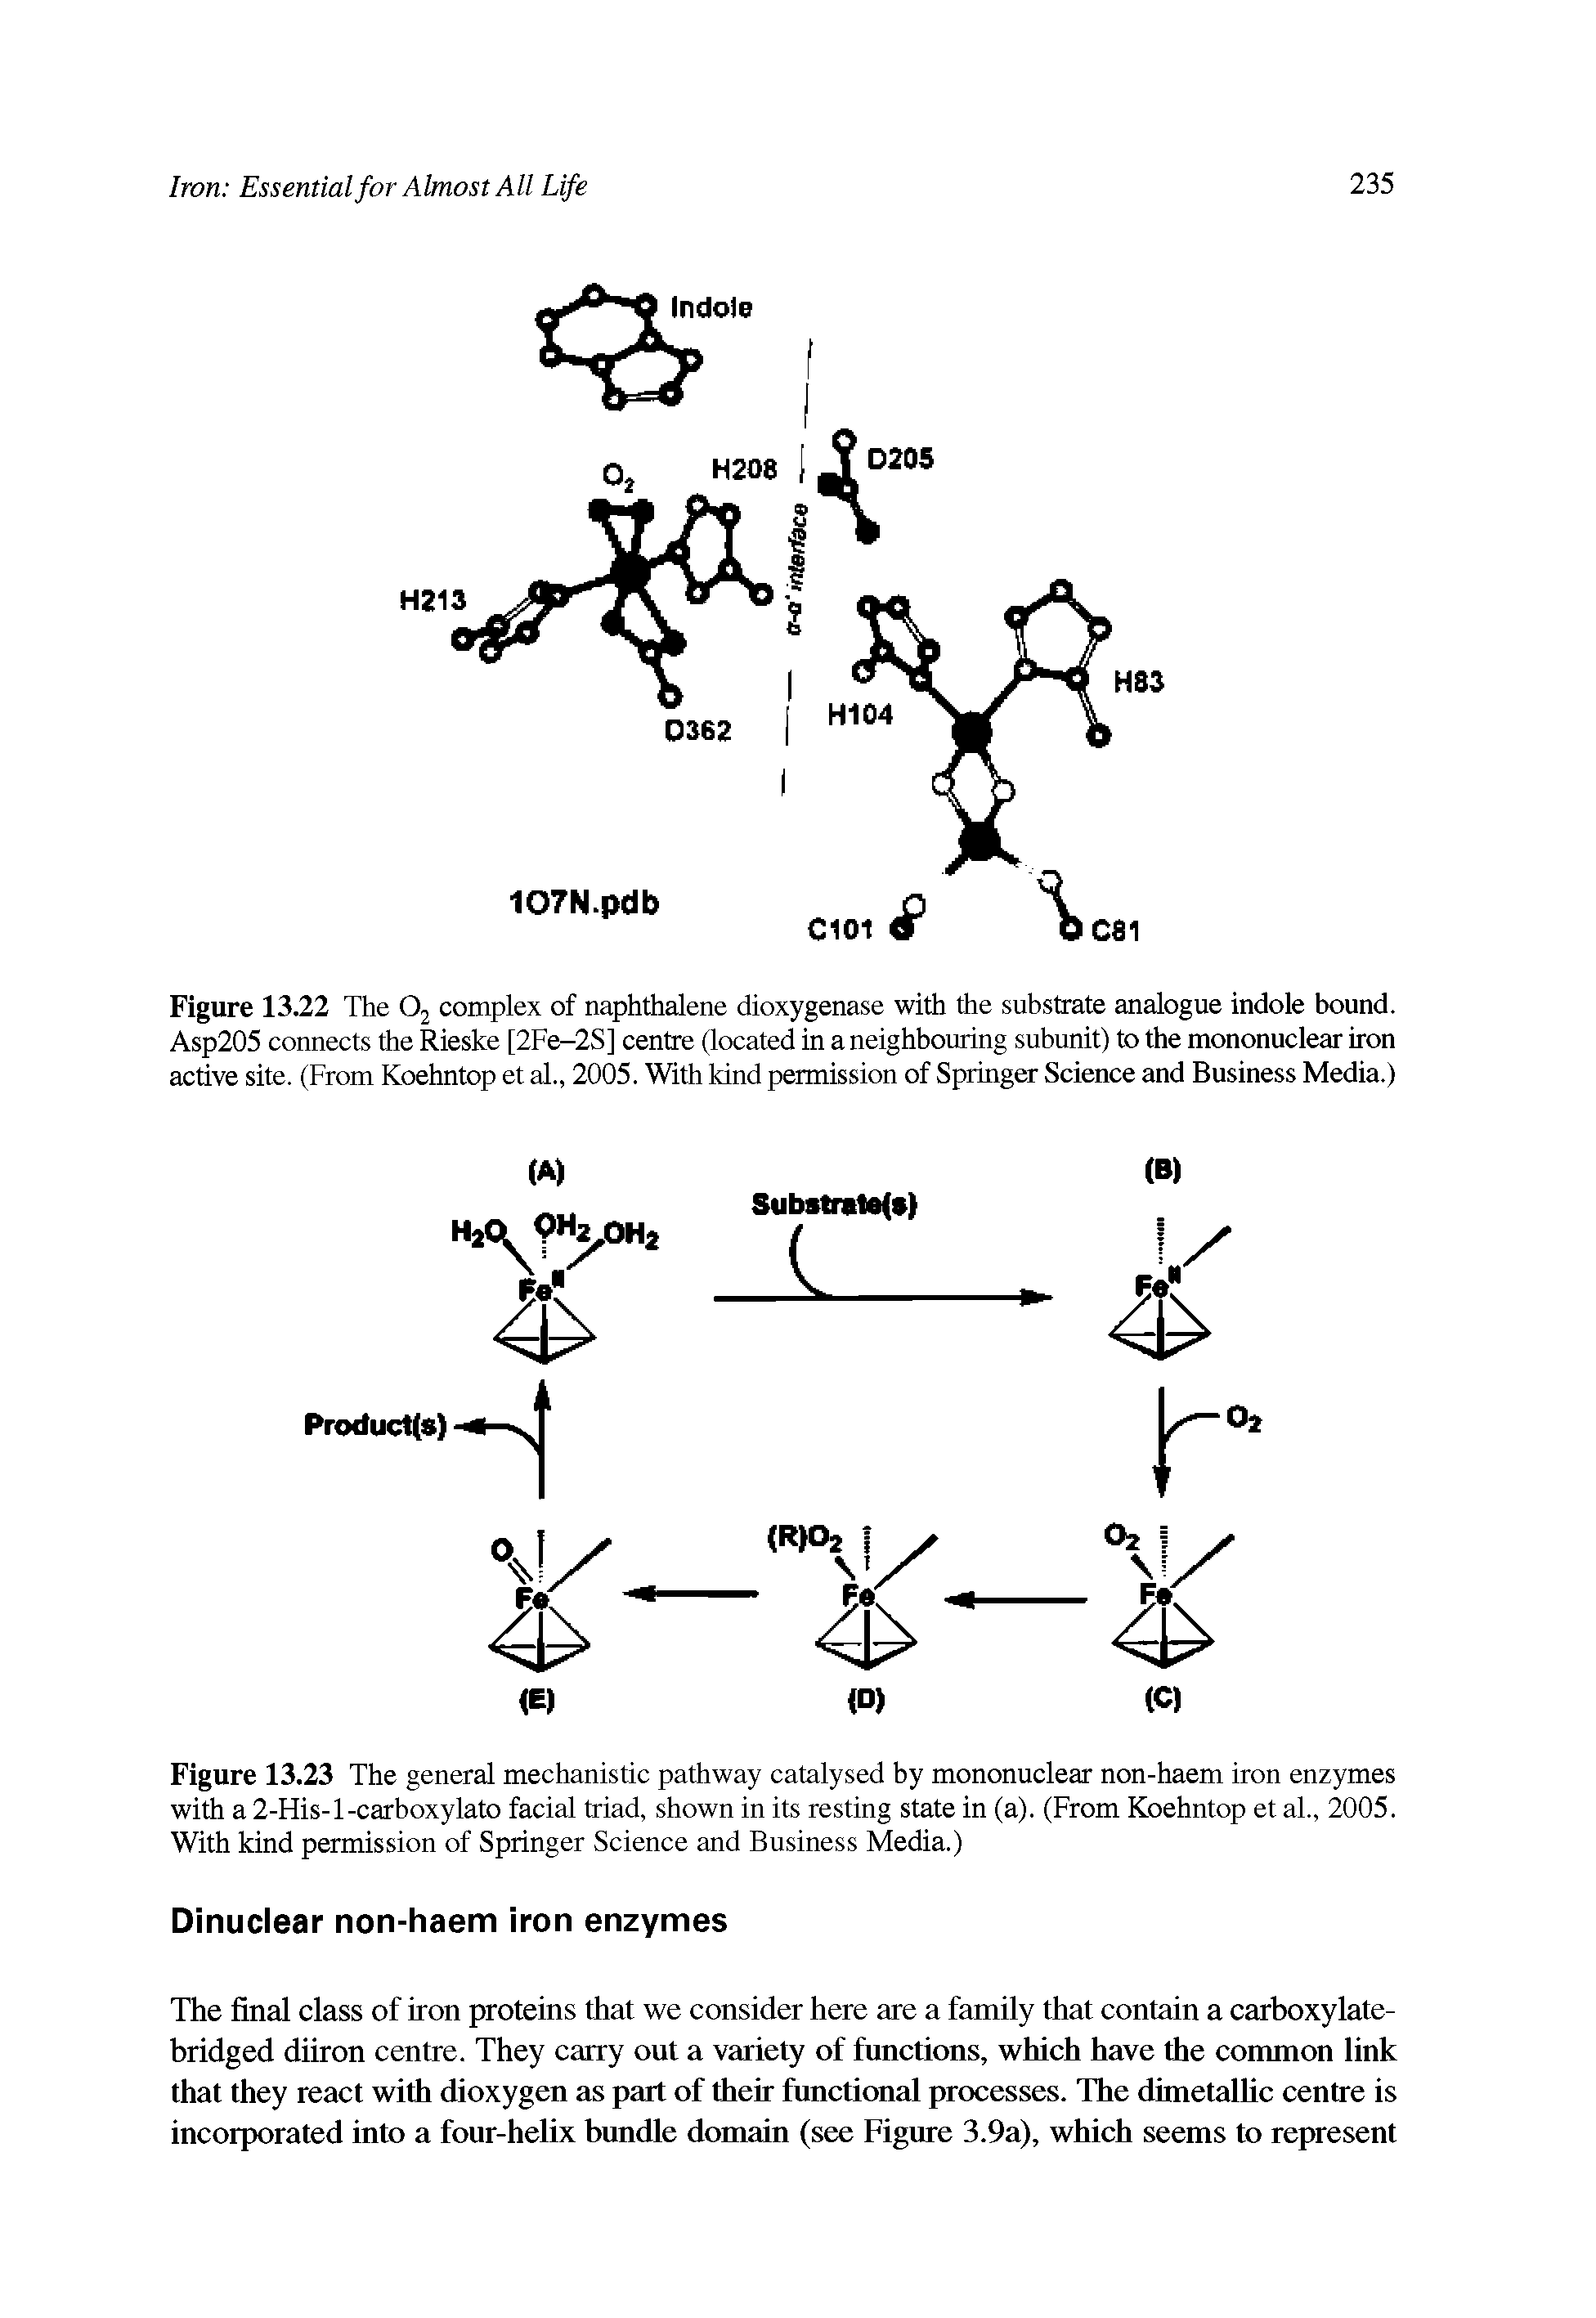 Figure 13.22 The 02 complex of naphthalene dioxygenase with the substrate analogue indole bound. Asp205 connects the Rieske [2Fe-2S] centre (located in a neighbouring subunit) to the mononuclear iron active site. (From Koehntop et al., 2005. With kind permission of Springer Science and Business Media.)...